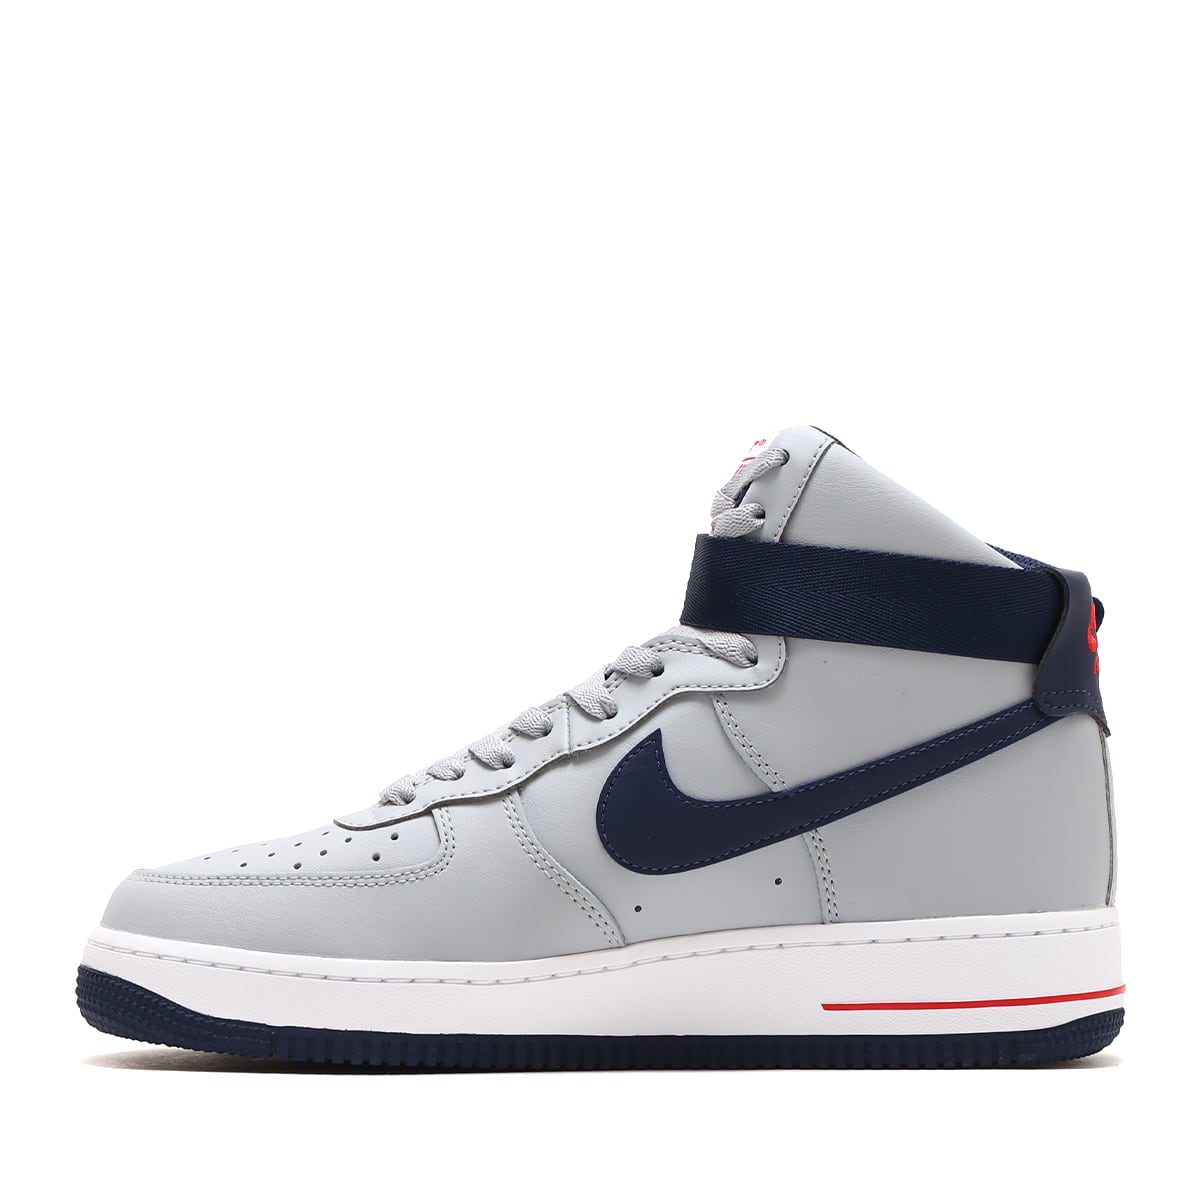 NIKE WMNS AIR FORCE 1 HI QS WOLF GREY/COLLEGE NAVY-UNIVERSITY RED